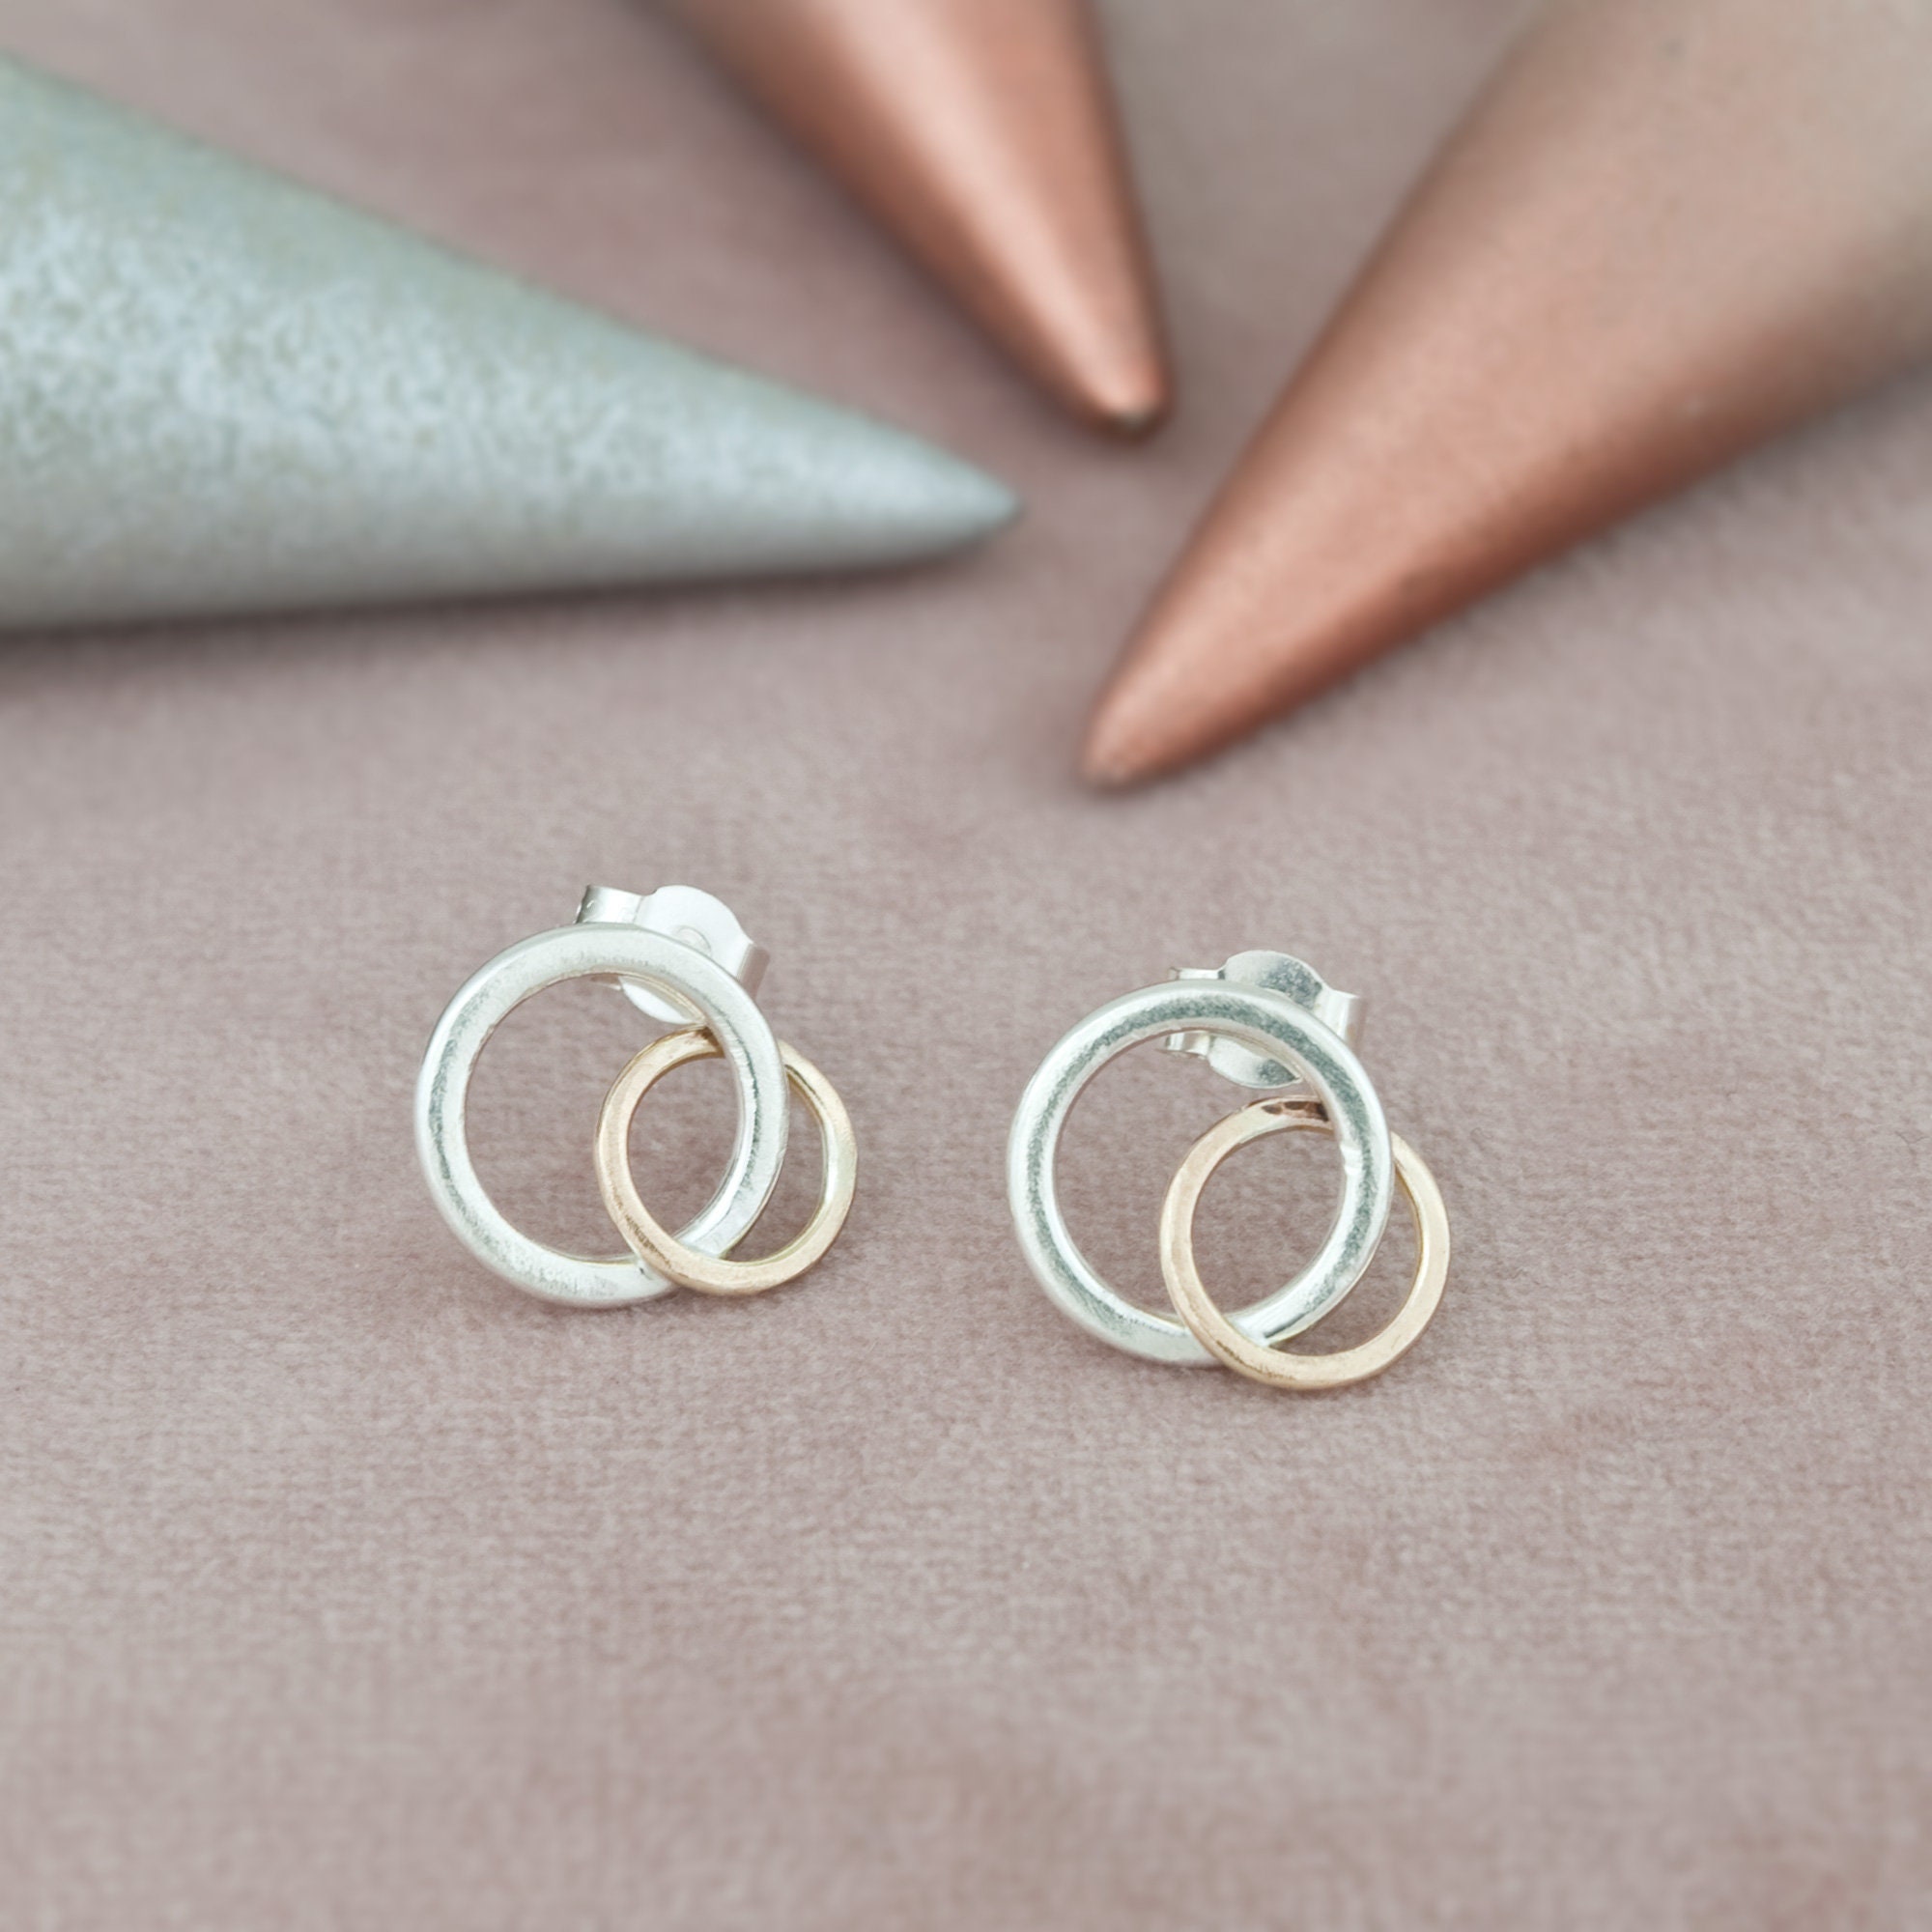 Infinity Stud Earrings, Linked Circles, Gold & Silver, Eternity, Gifts For Daughters, Handmade